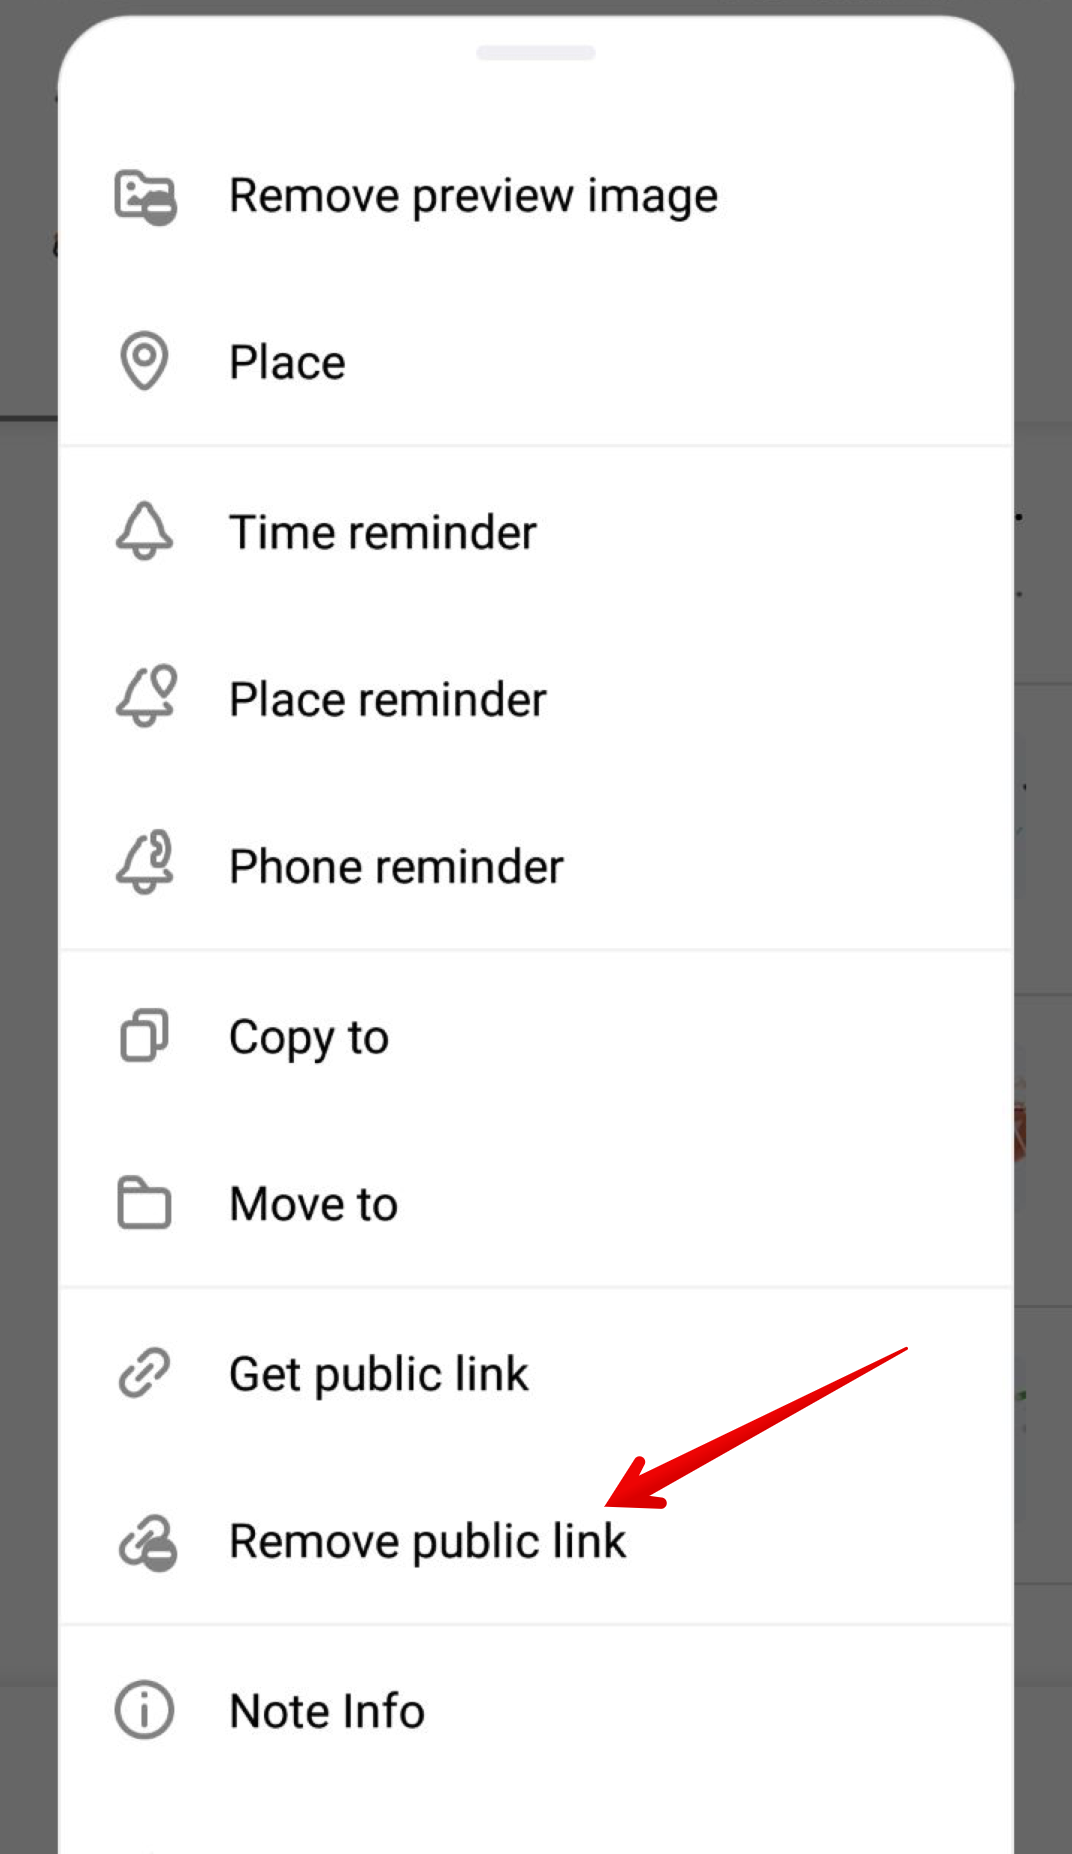 To remove a previously created shared link to a page in the mobile app, use one of the following ways.